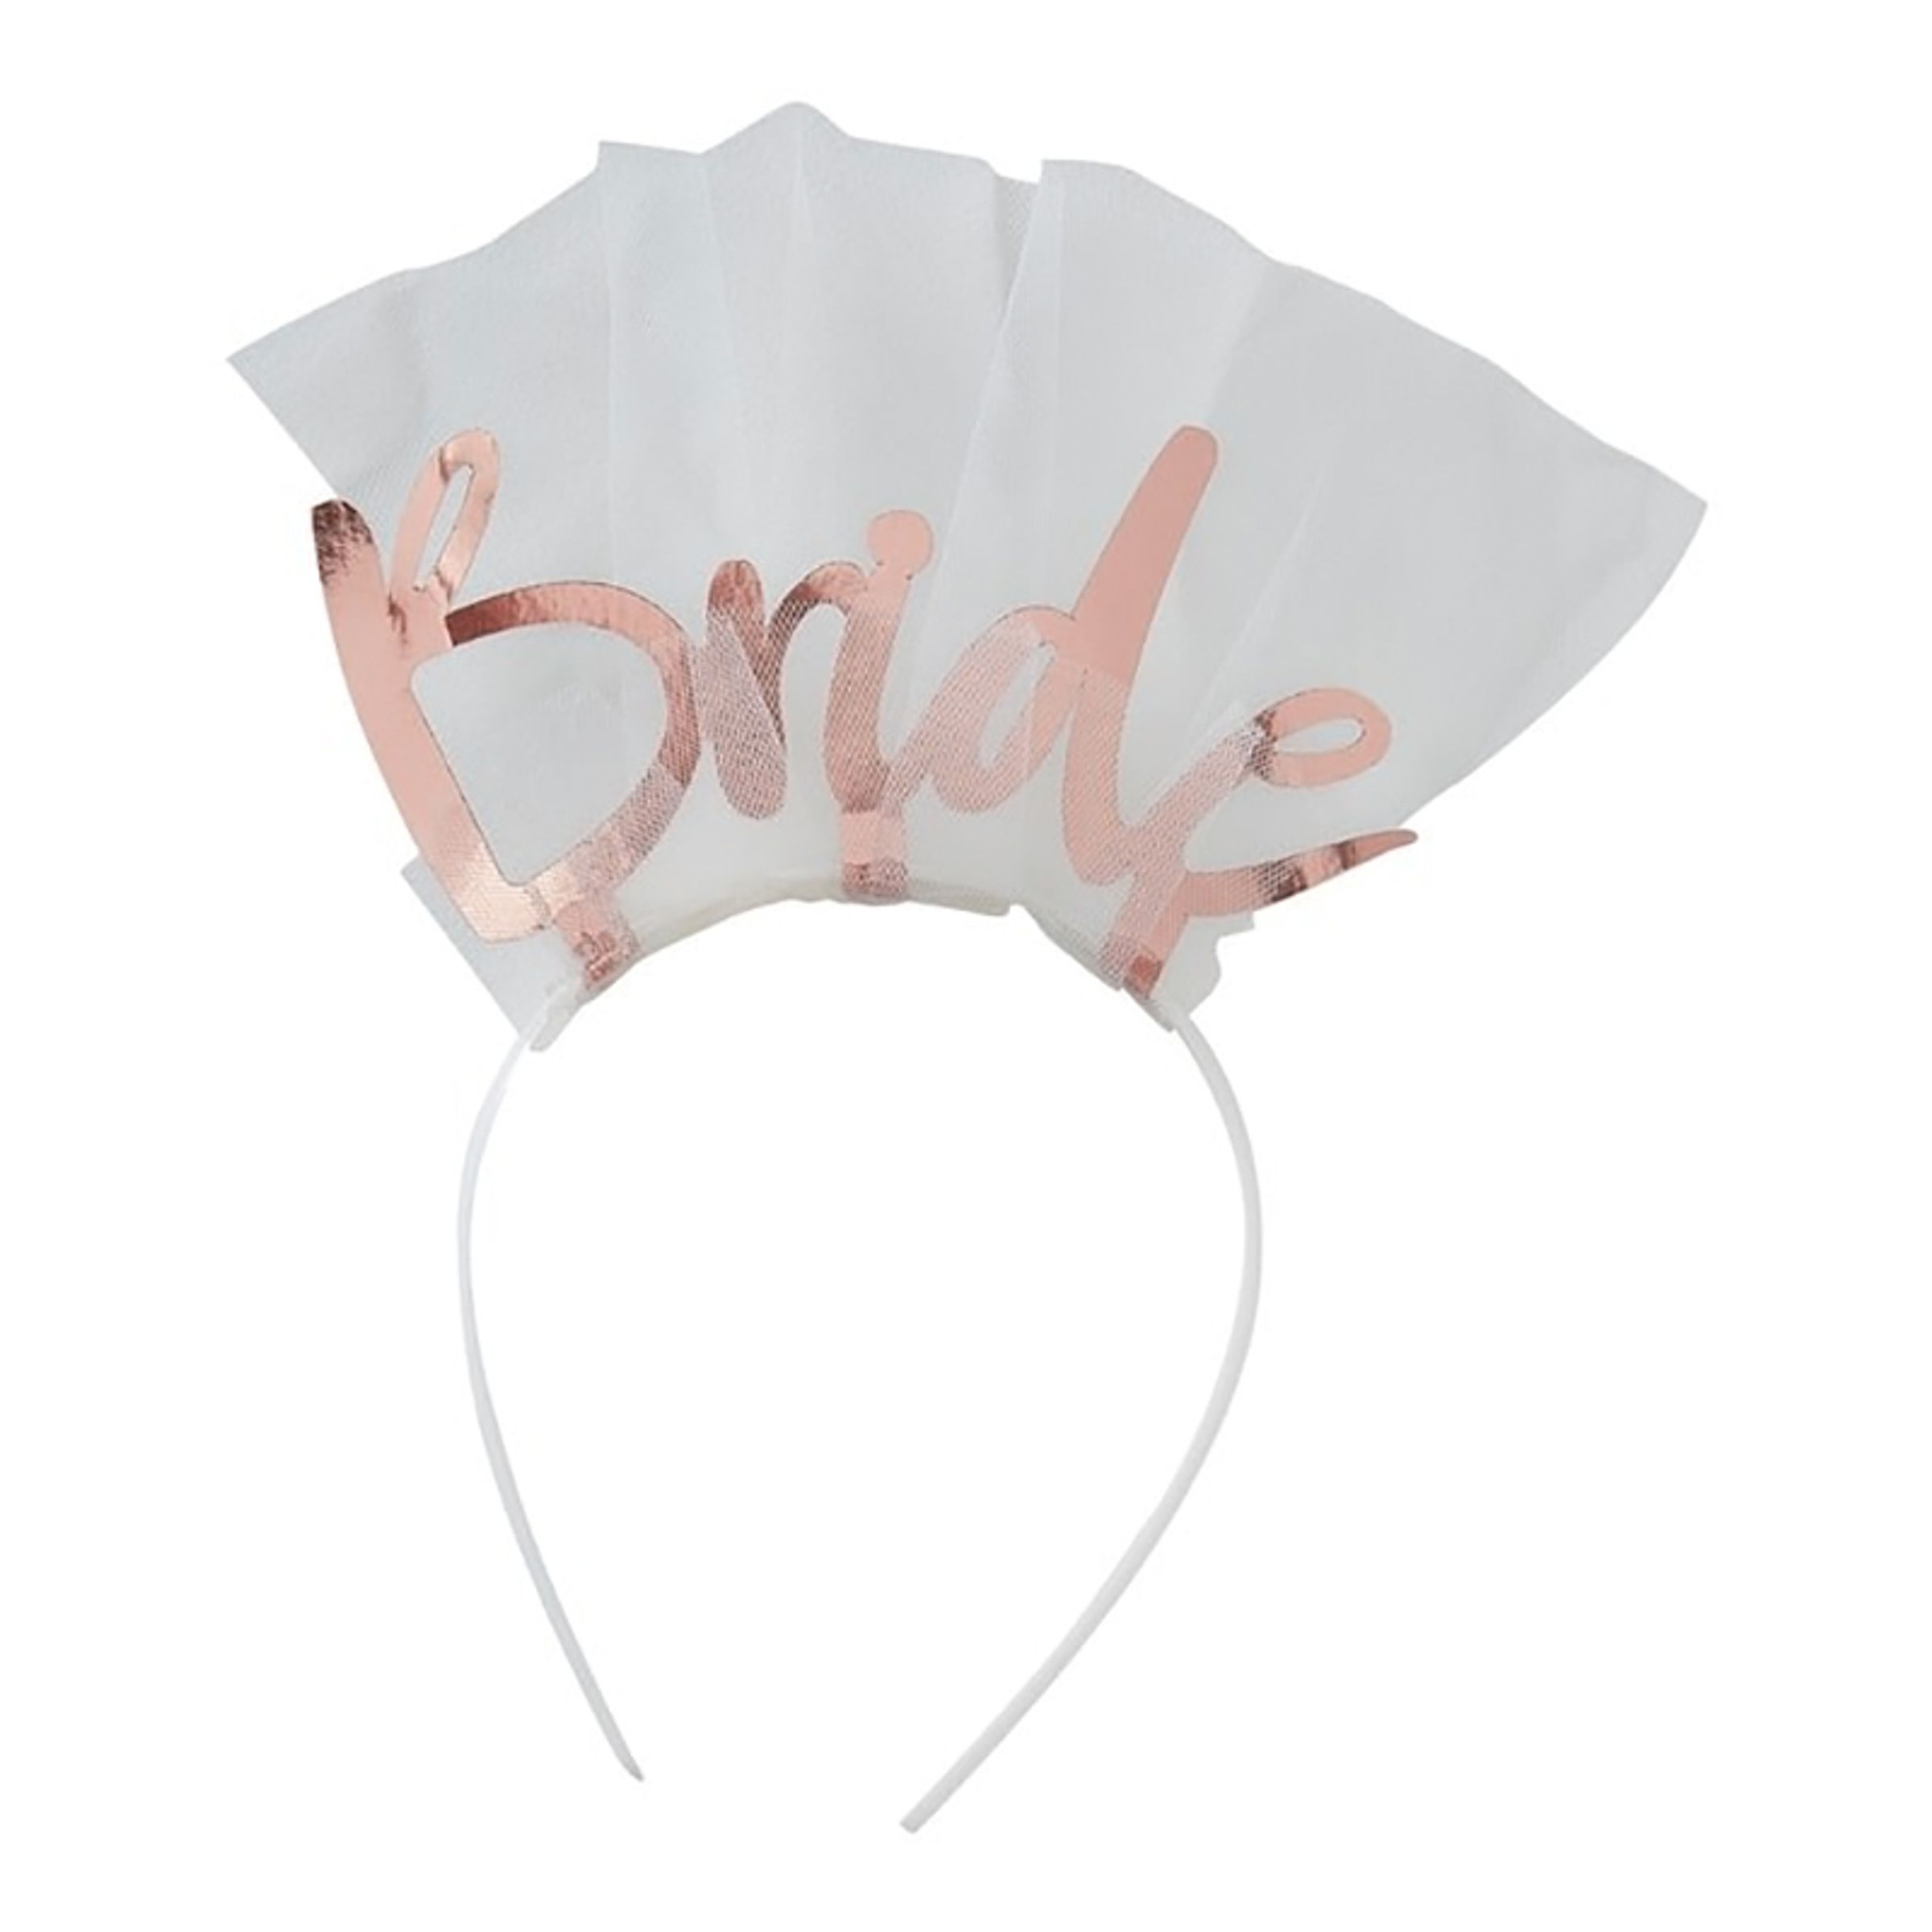 Diadem Bride to Be Roséguld - One size